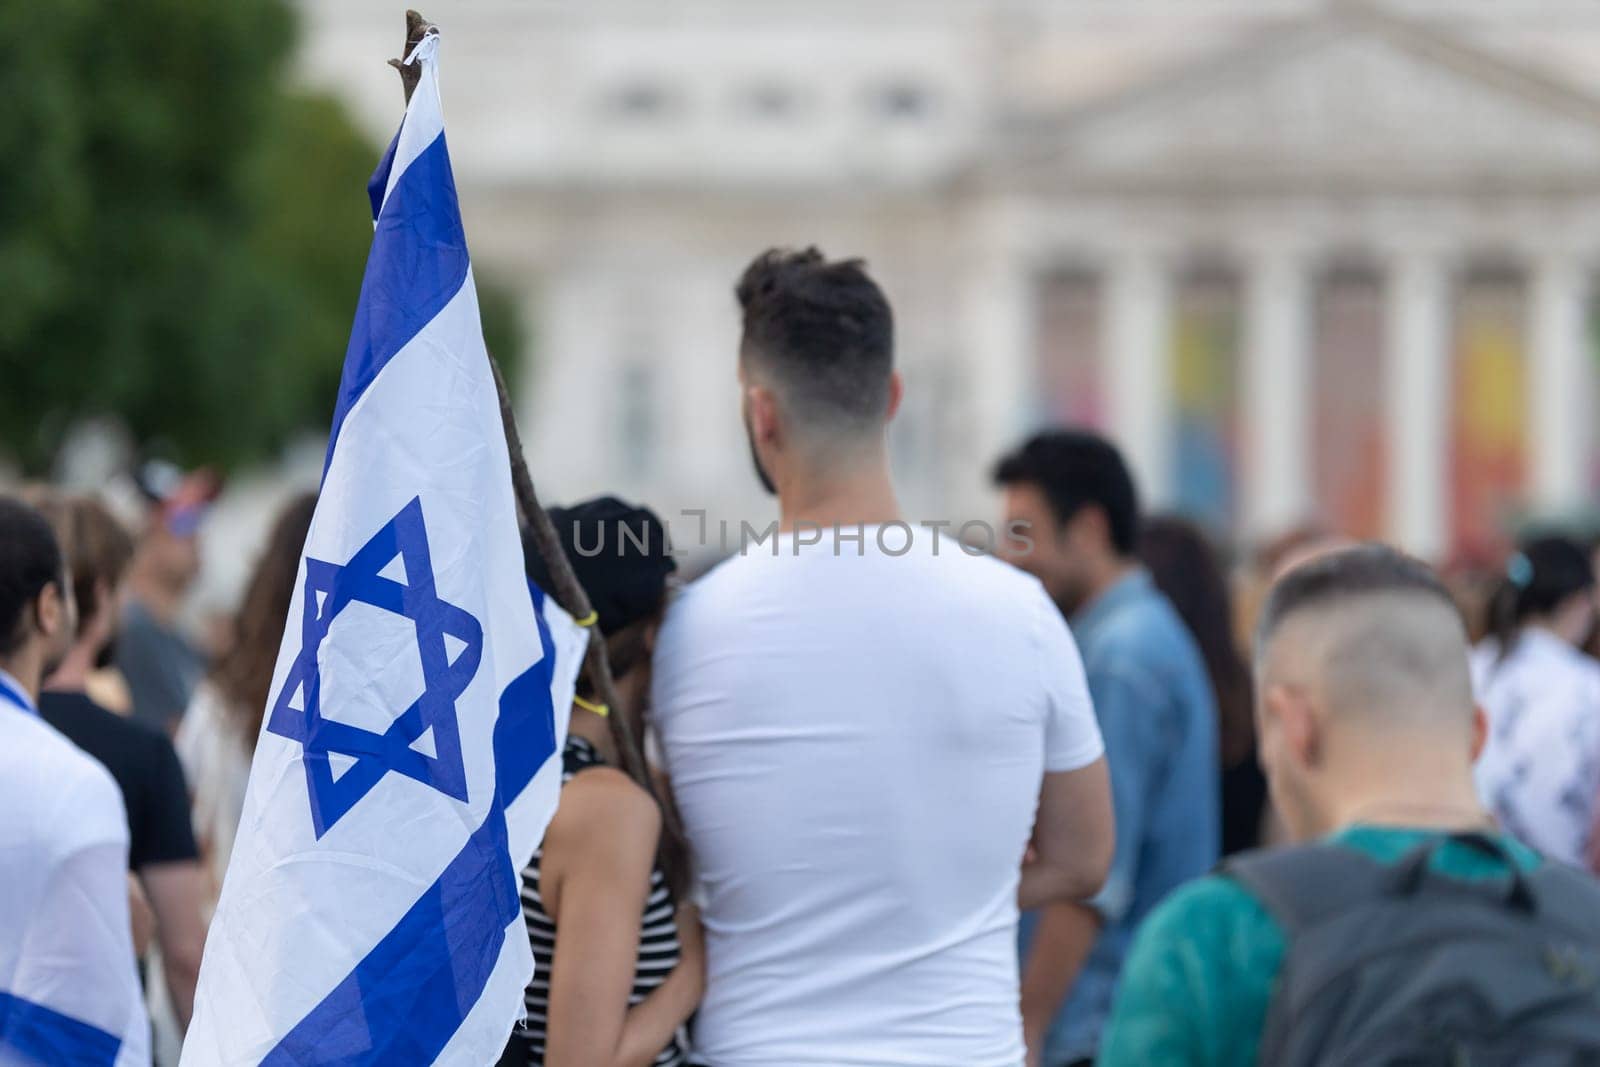 Lisbon, Portugal October 10, 2023. People at a rally in support of Israel hug and hold Israeli flags. Mid. shot